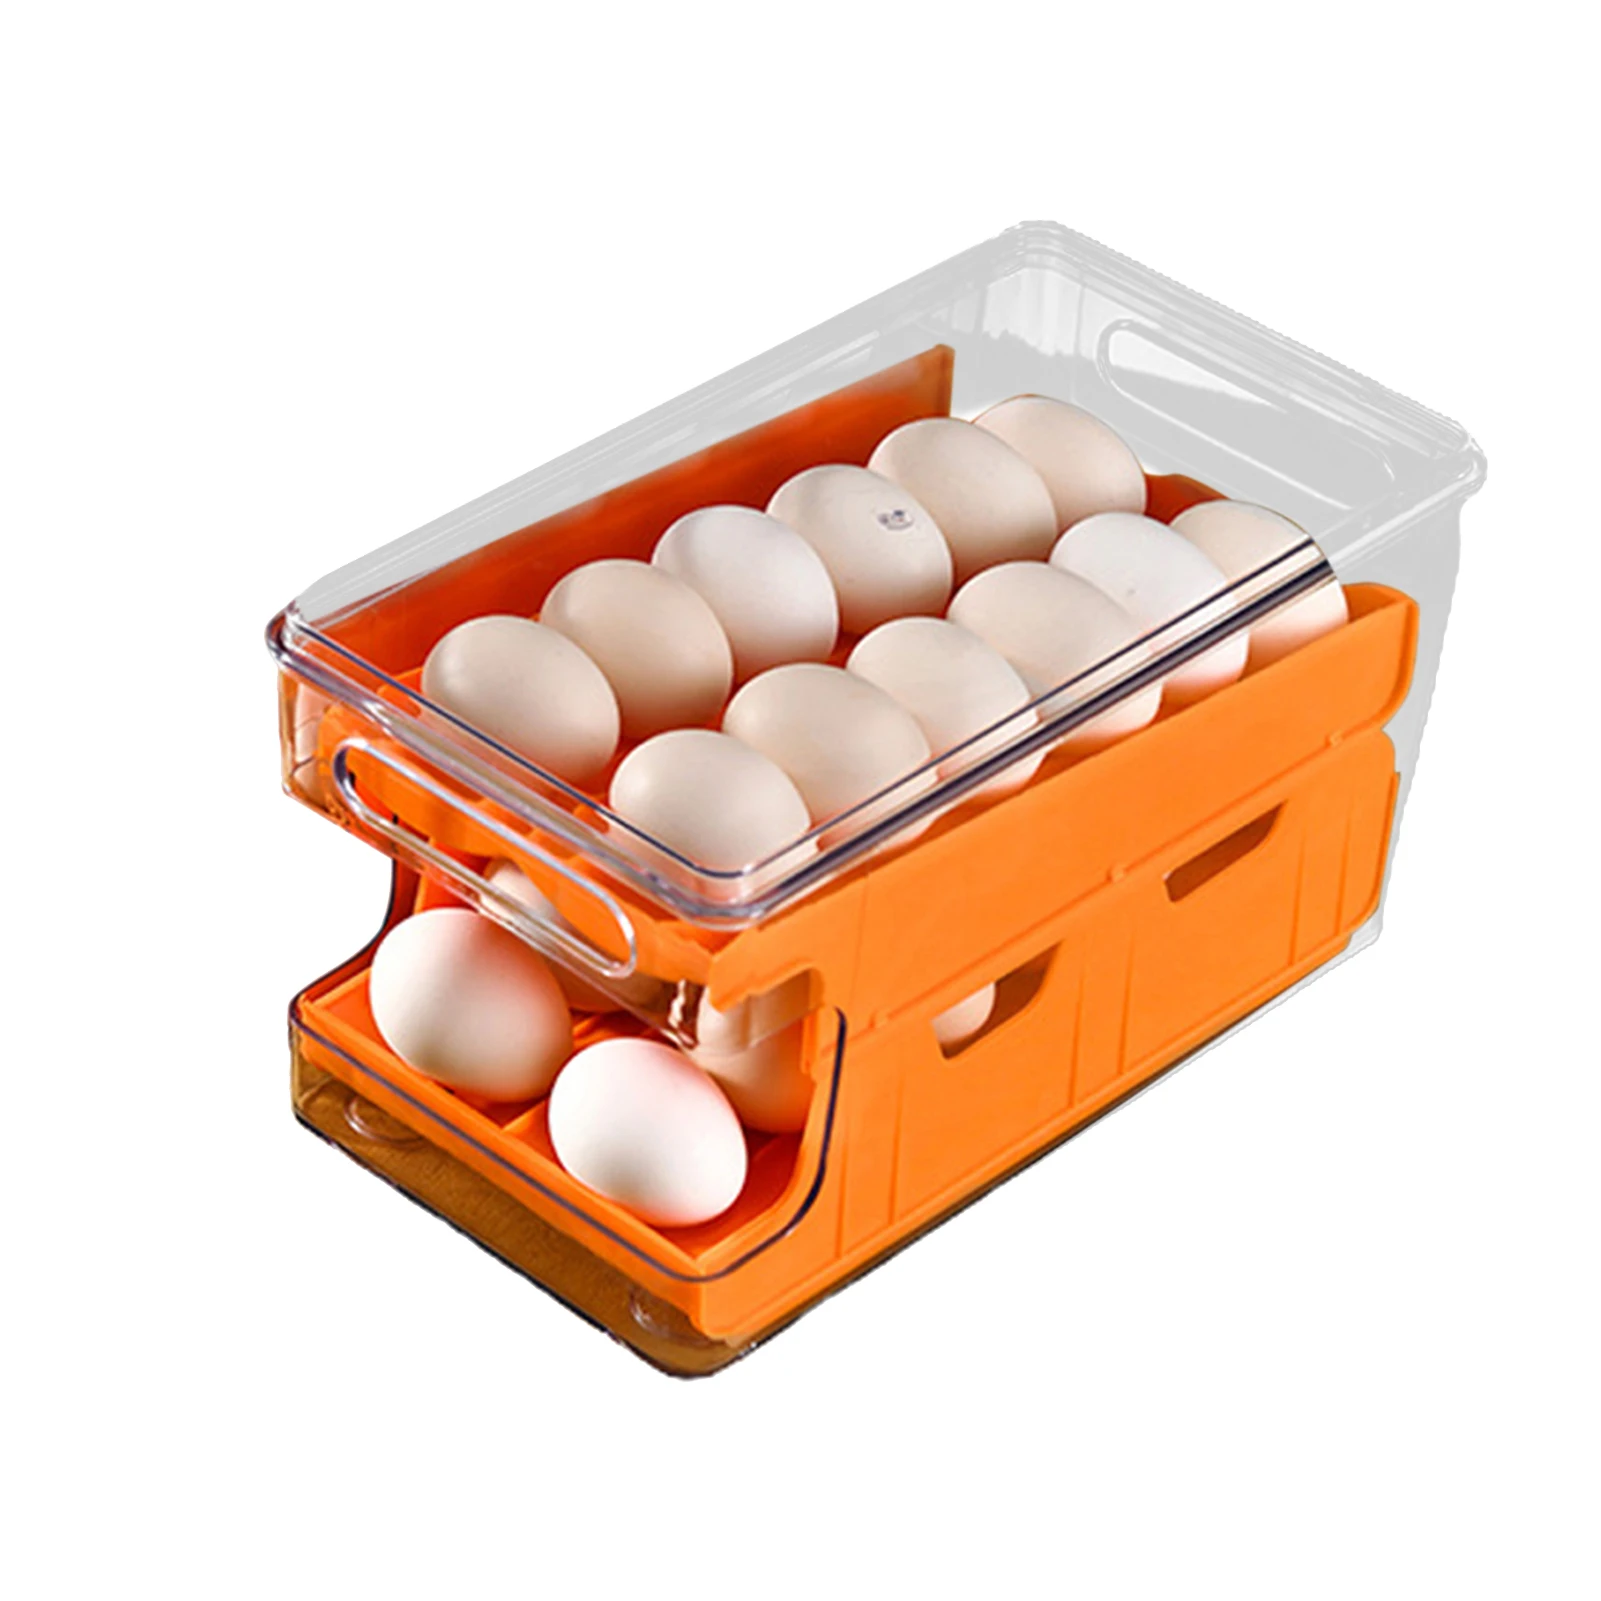 with Fresh Schedule Rolling Drawer Type Refrigerator Eggs Box Container About 21 Eggs Storage Saving Container JZENZERO 3pcs Refrigerator Egg Storage Box 3 Blue 